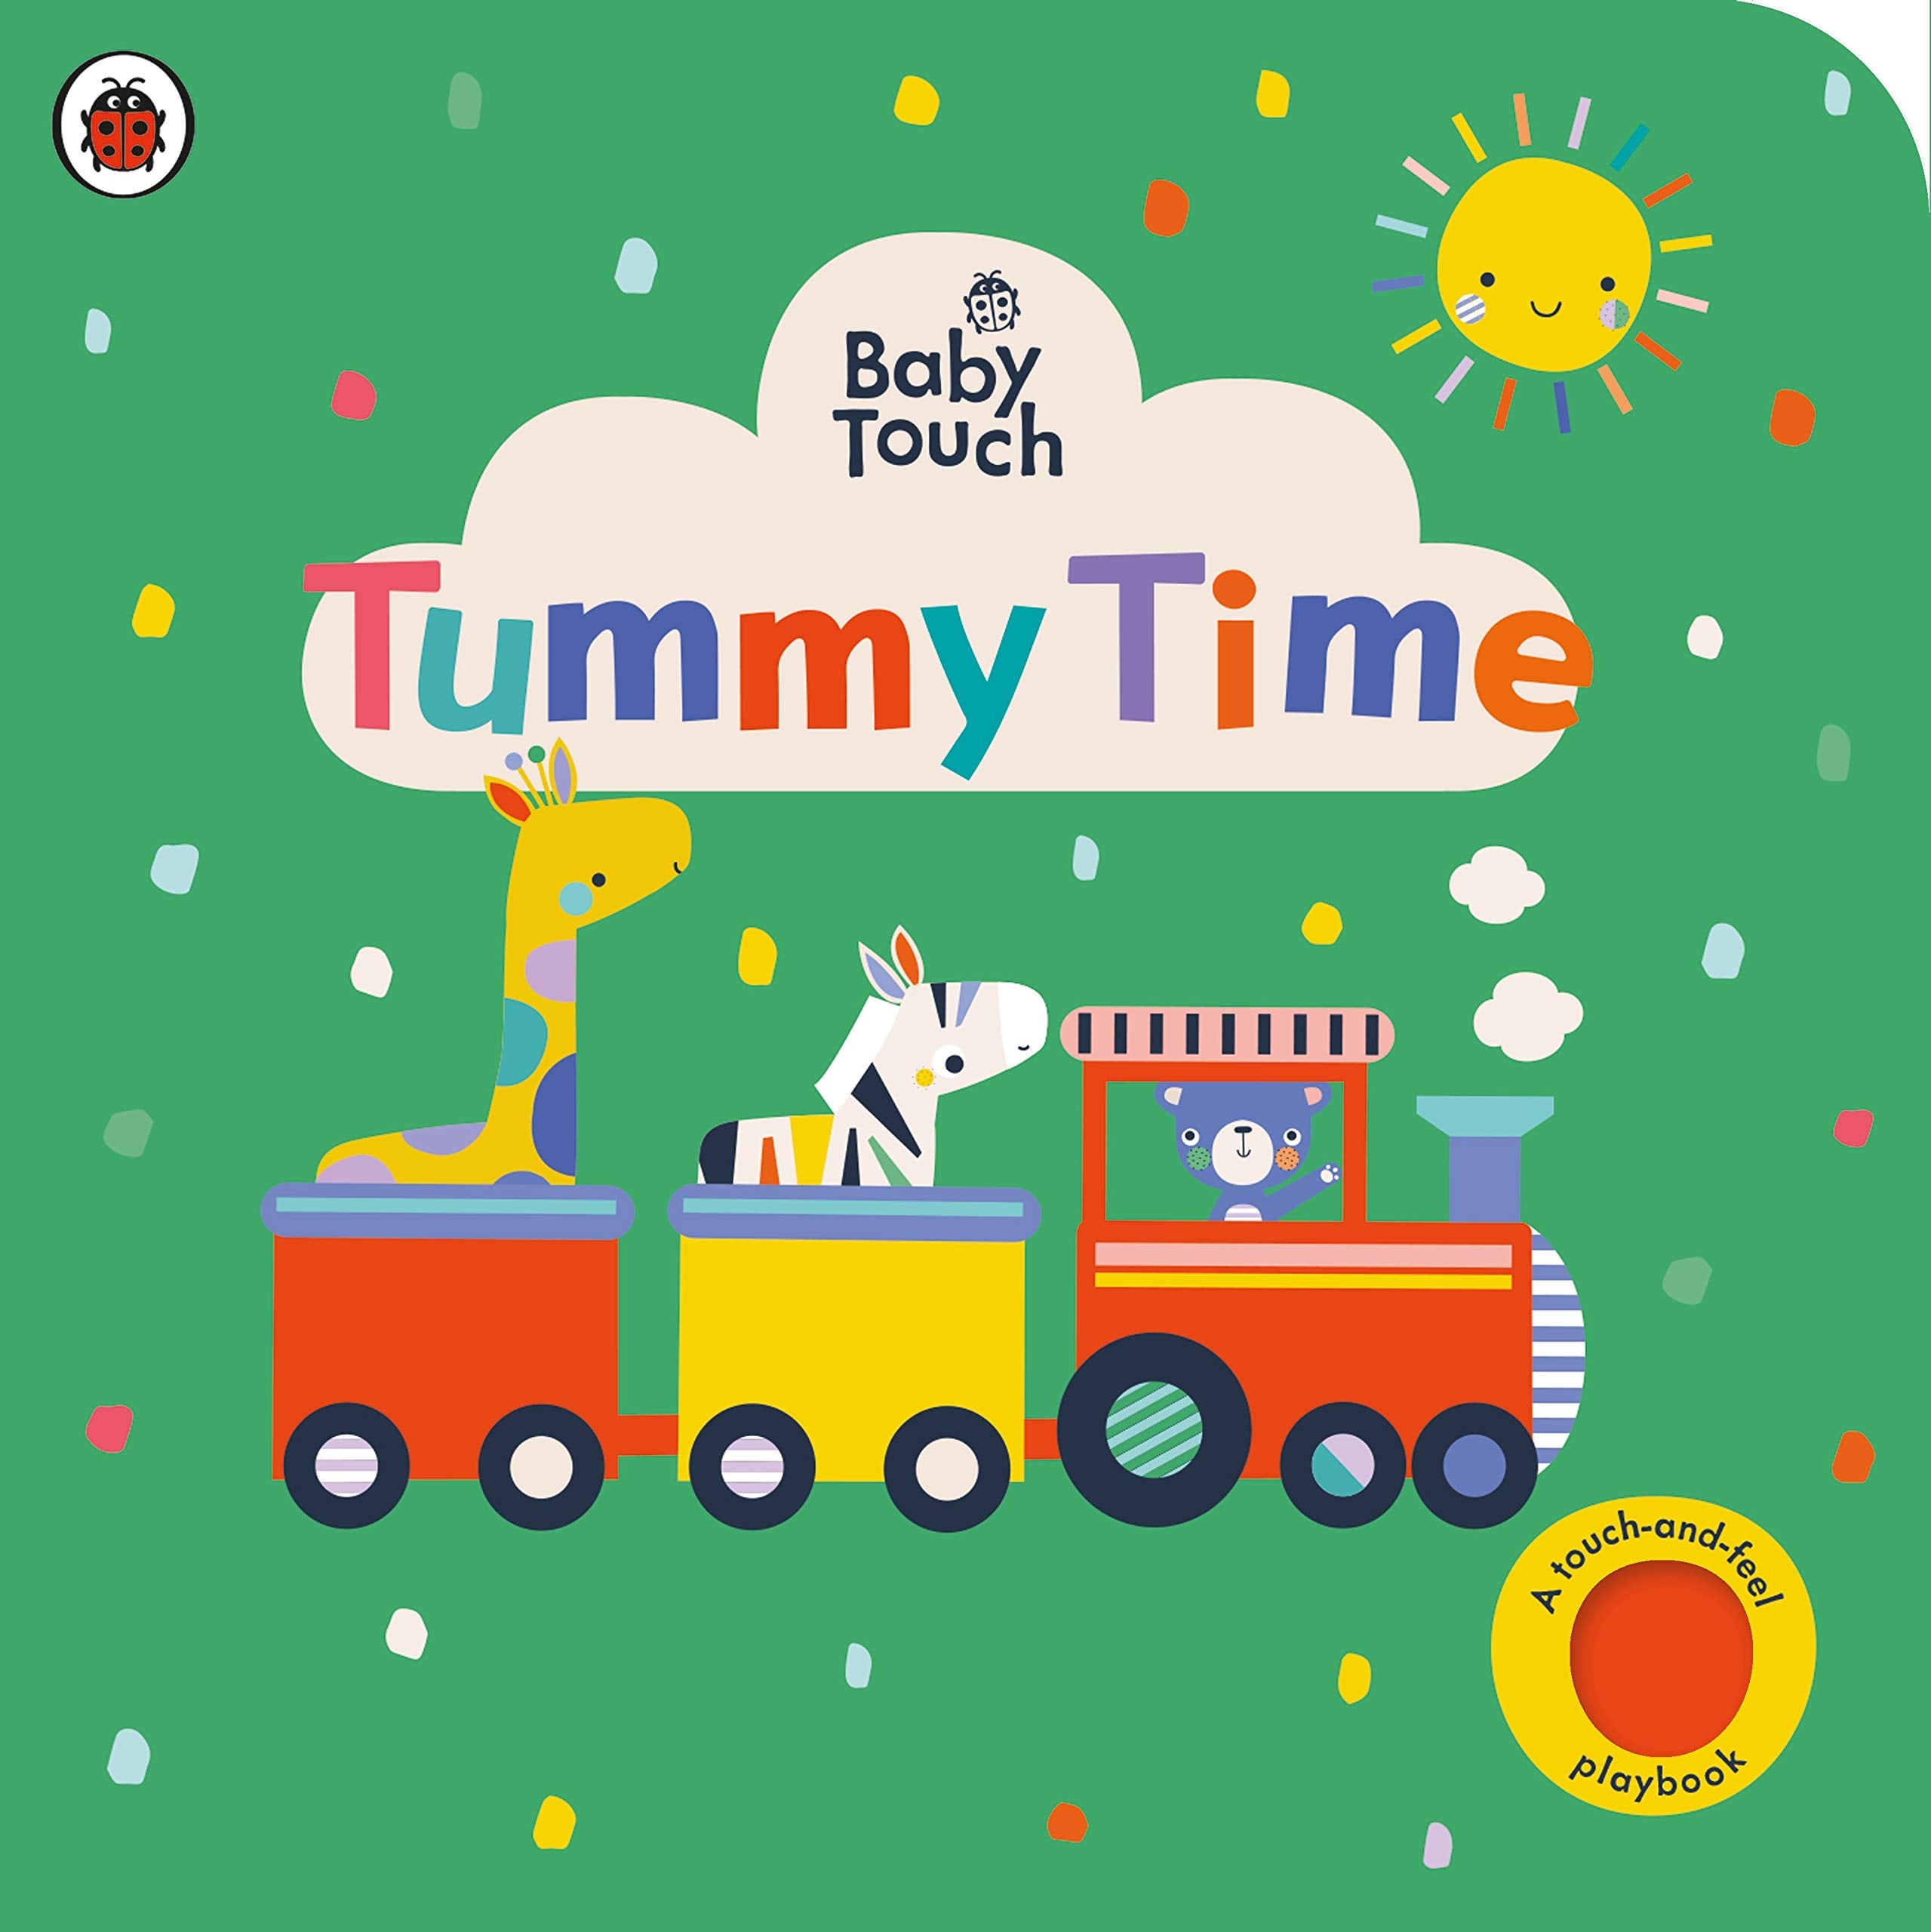 Baby Touch - Tummy Time